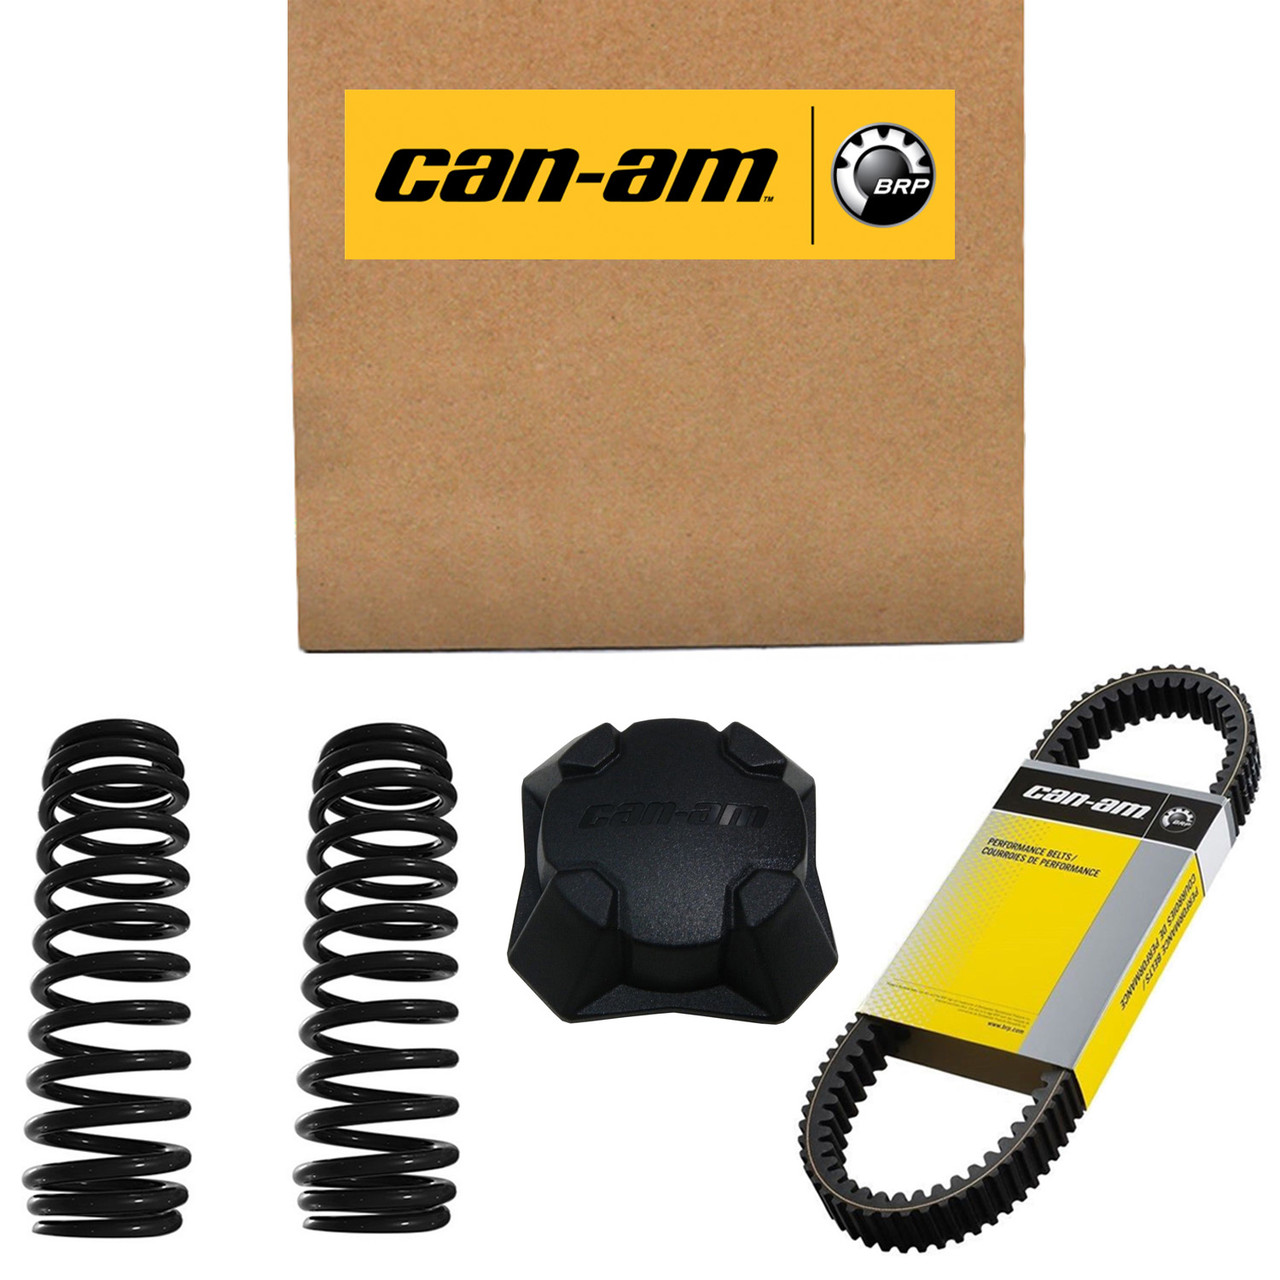 Can-Am New OEM Electronic Box, 420266972